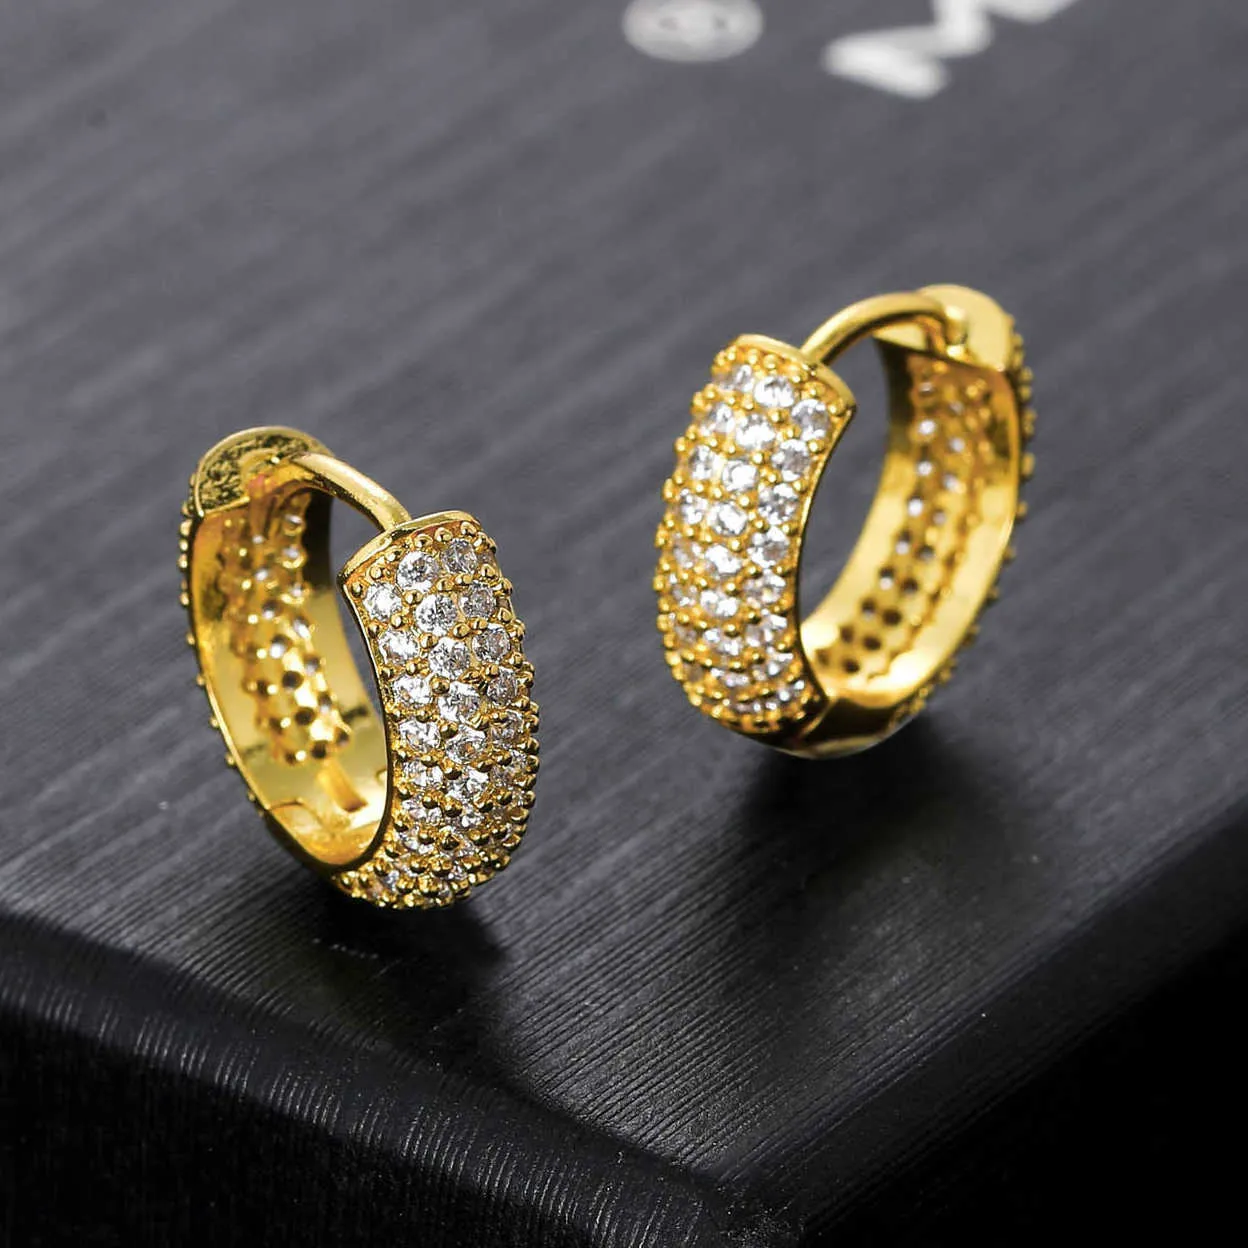 Designer Earrings New Fashion Huggie Earring Hiphop Round Hoop Earrings Trend Brand Personalized Micro Iced Out Cubic Zircon Mens Accessories 3A CZ Stone Ear Jewelr